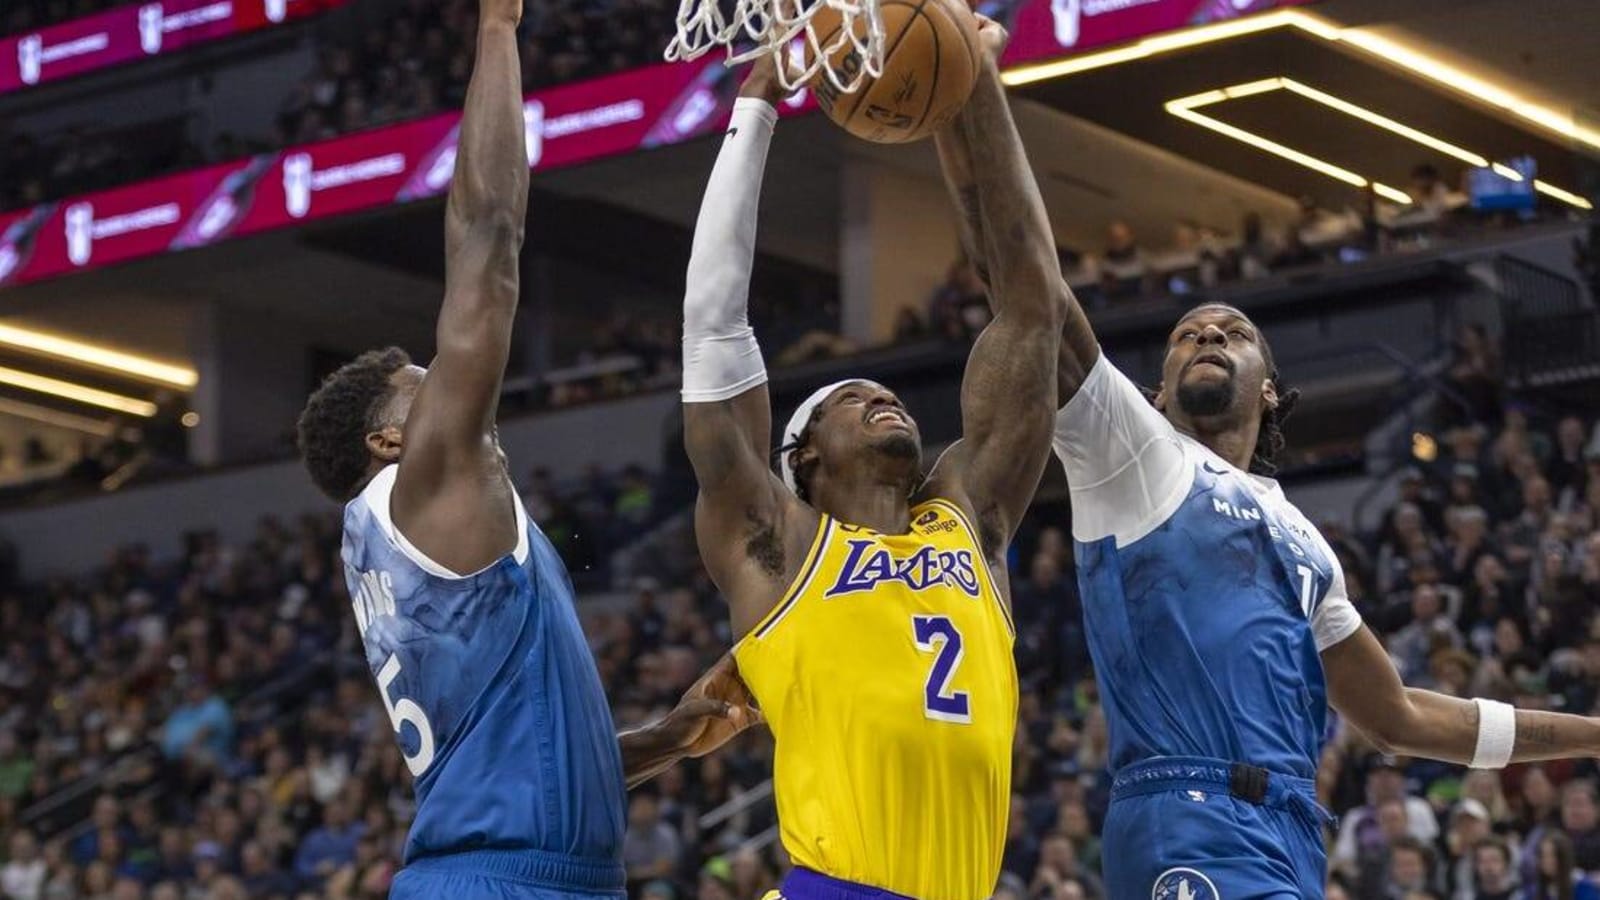 Wolves hold off Lakers as LeBron James (ankle) sits out